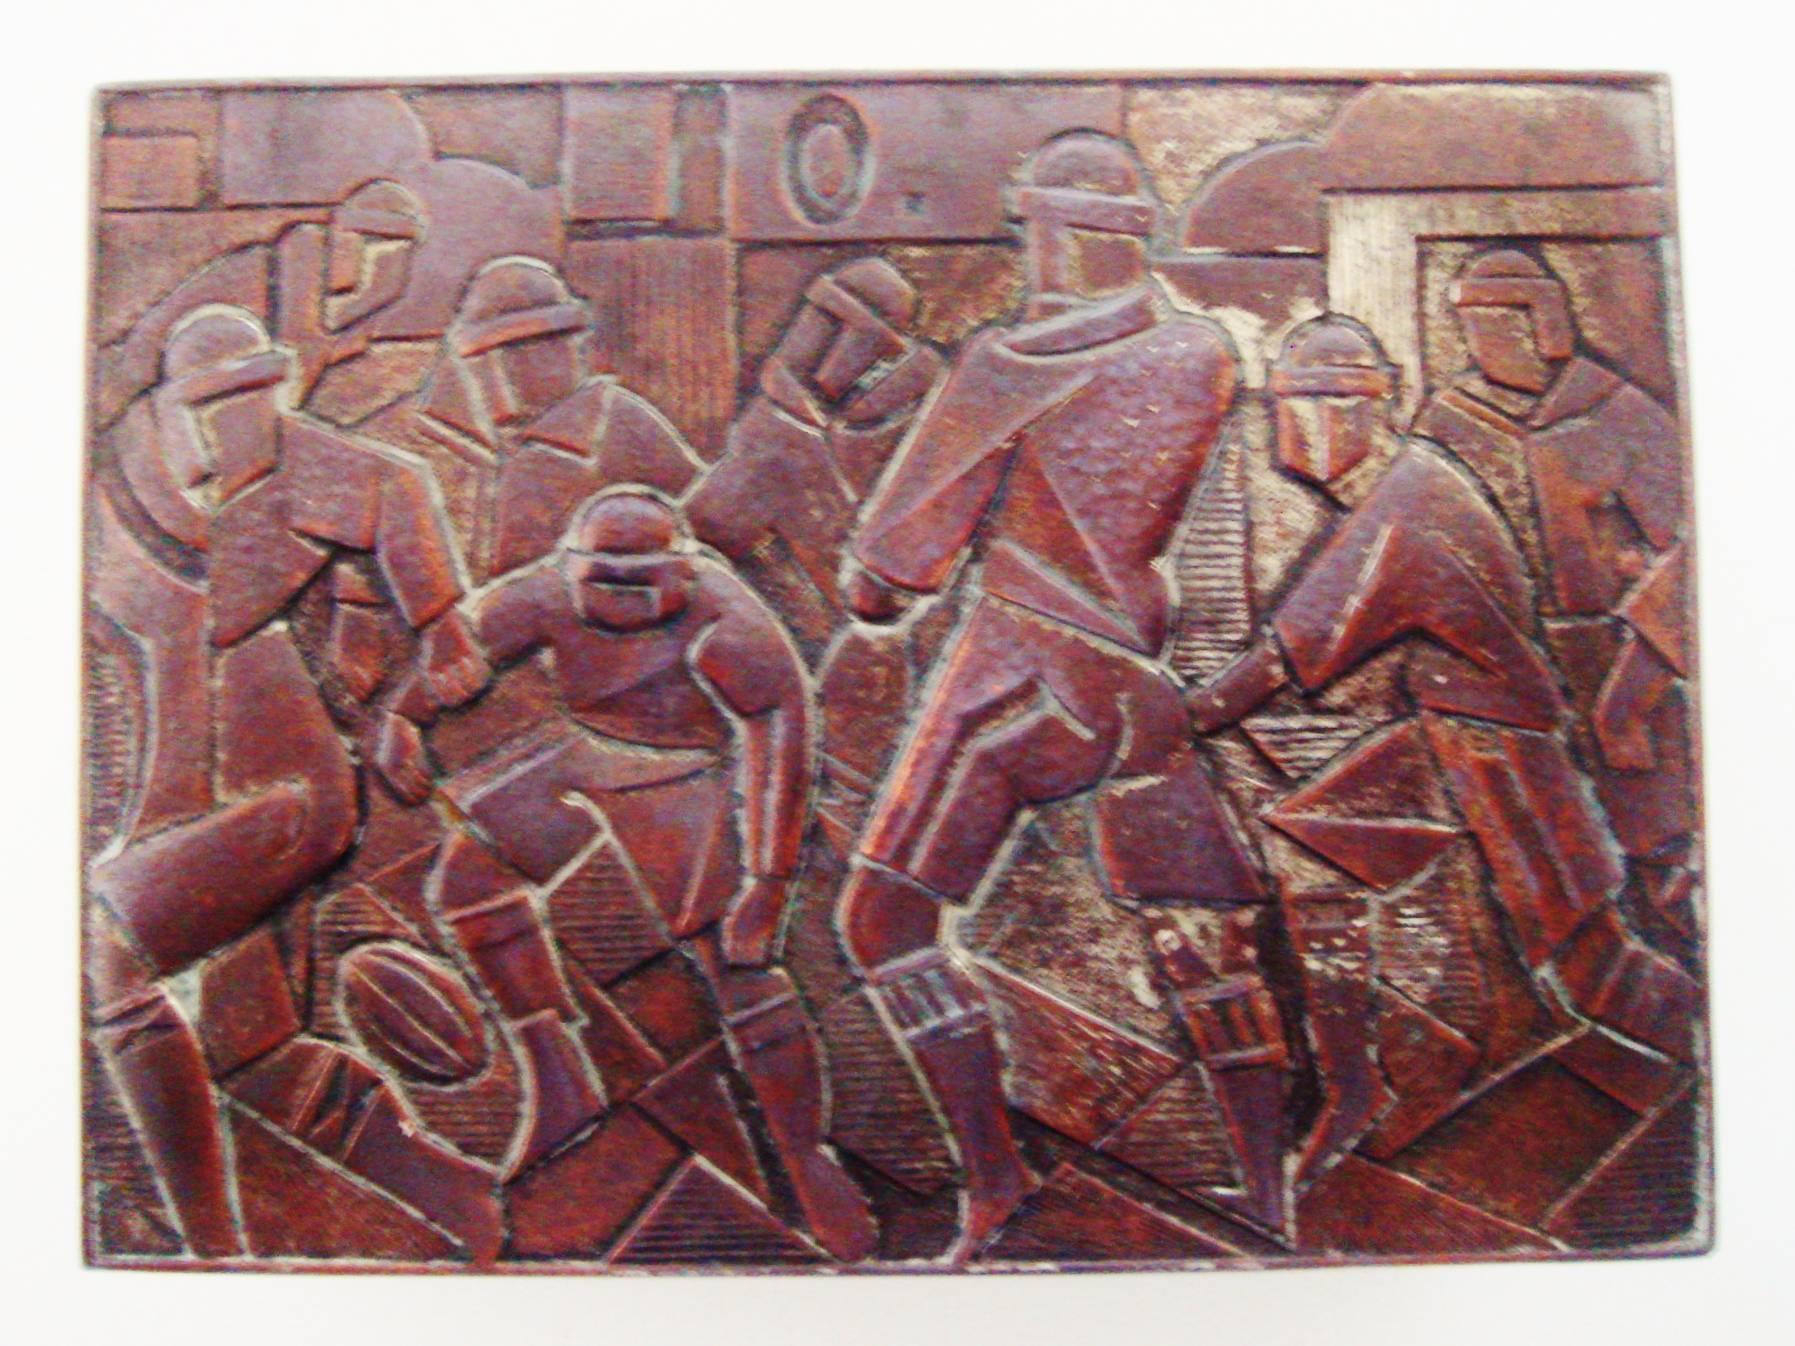 This Japanese Art Deco copper and nickel-plated spelter cigarette box with original cedar lining features the top and all four sides decorated with geometrically stylized sports scenes. The lid shows a football game with the players wearing the pre